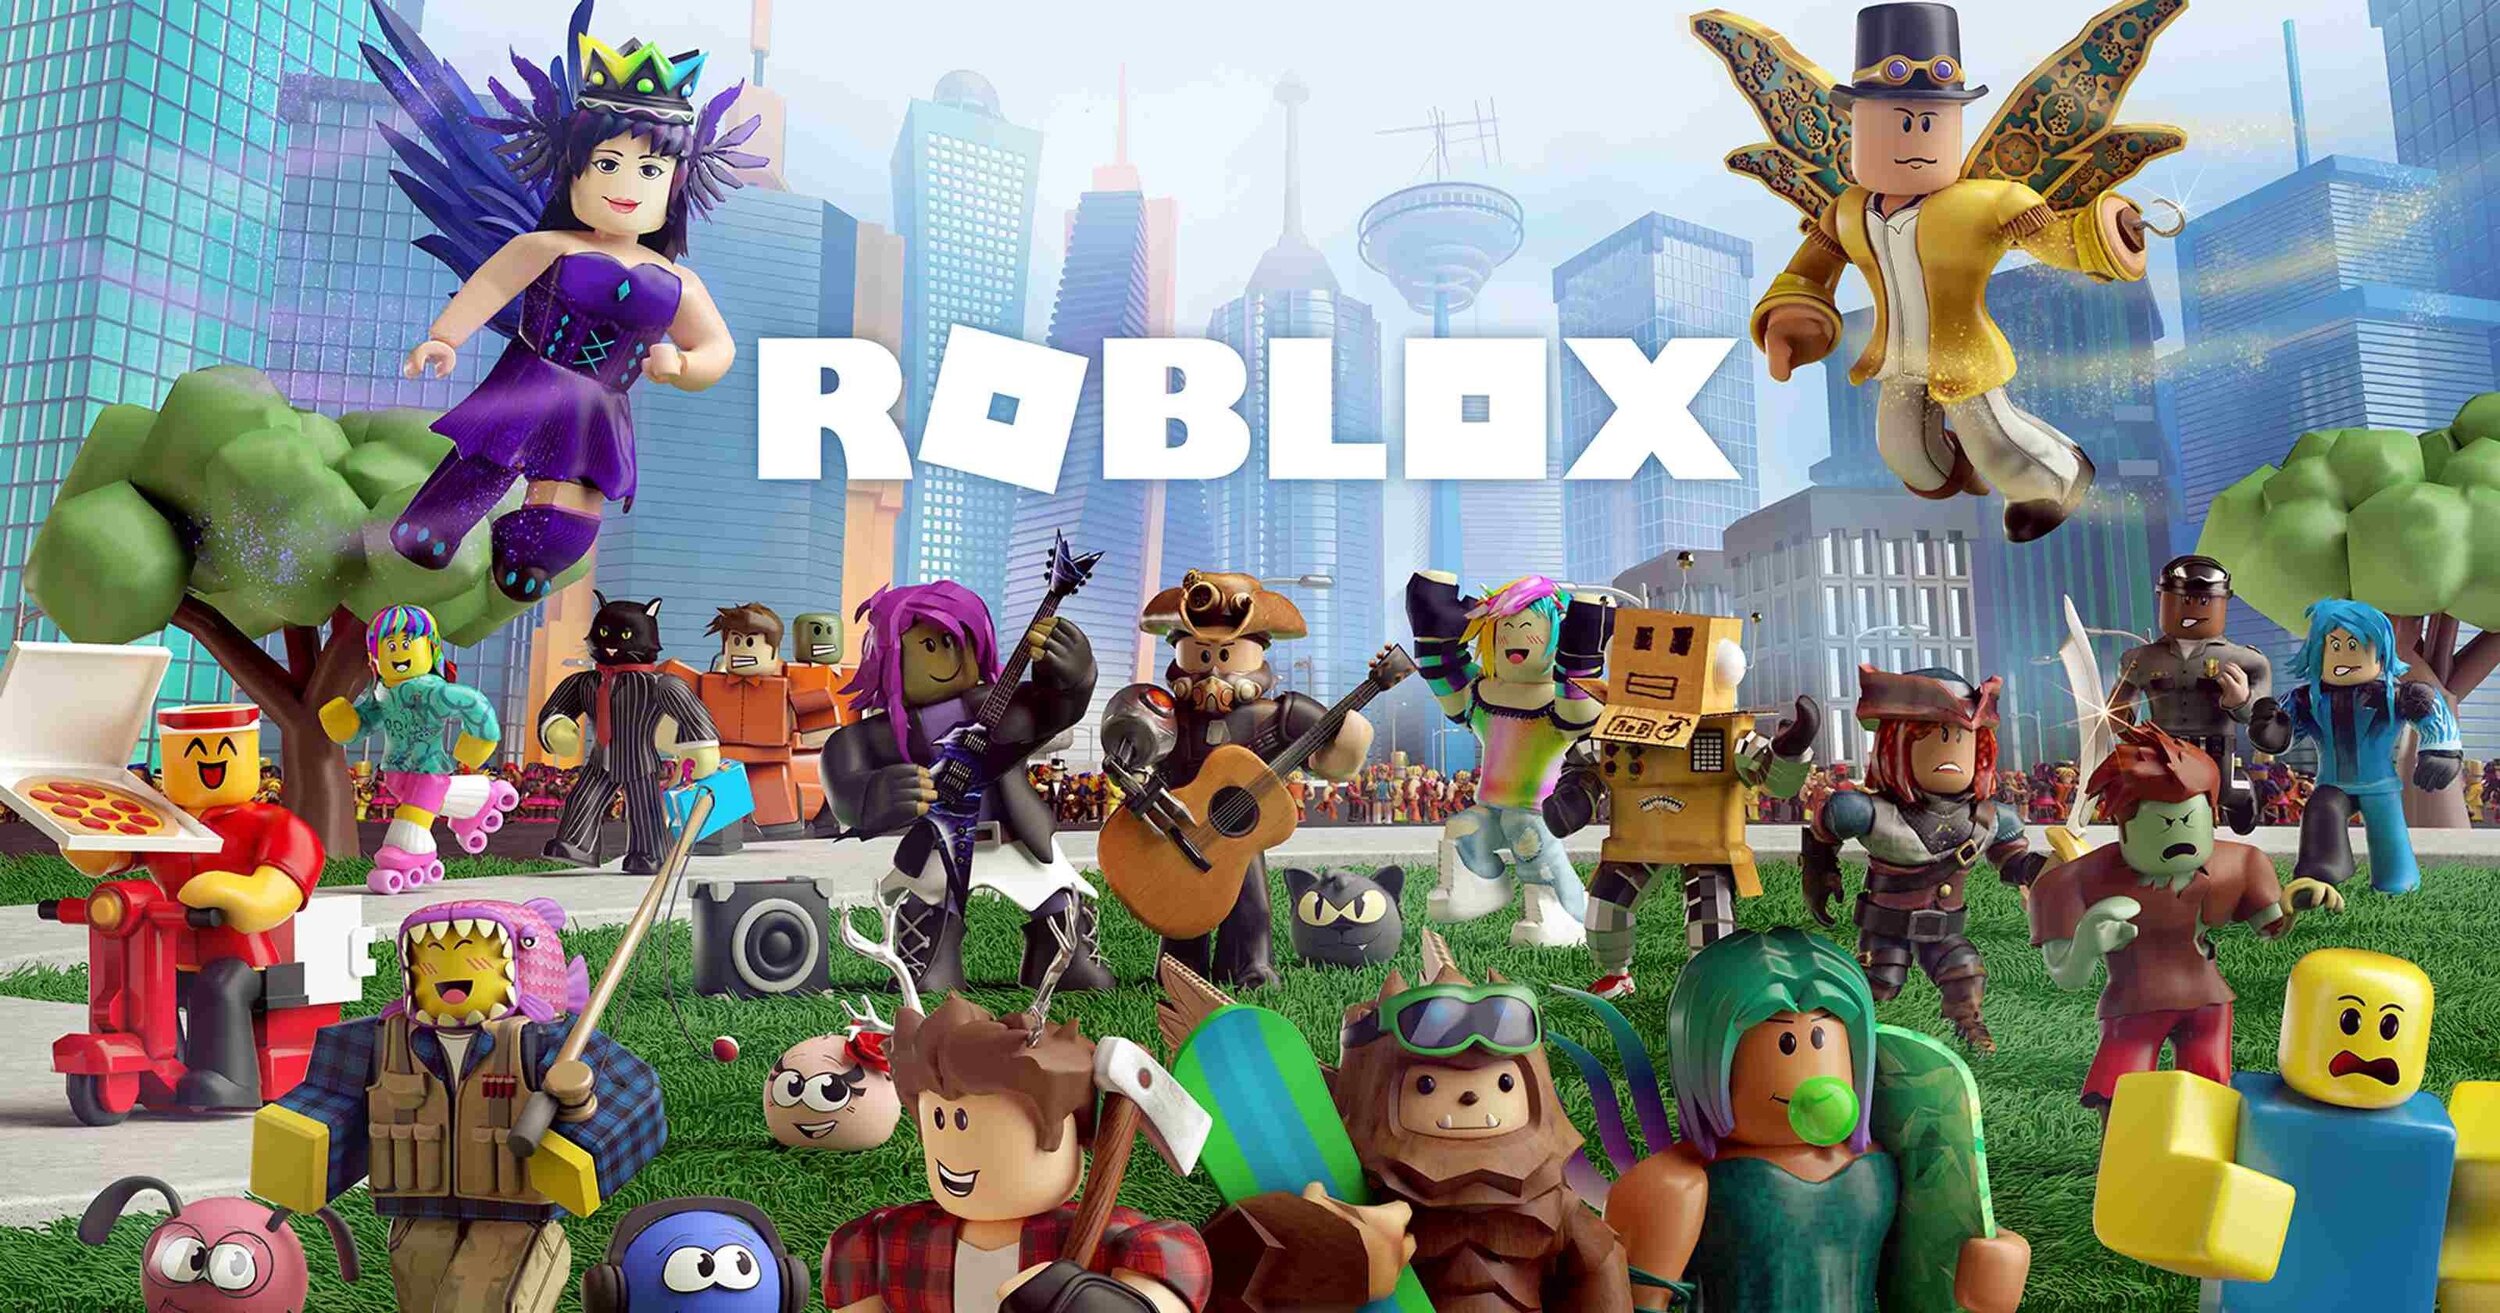 Today, Roblox has enhanced the PlayStation Vita, and even went to